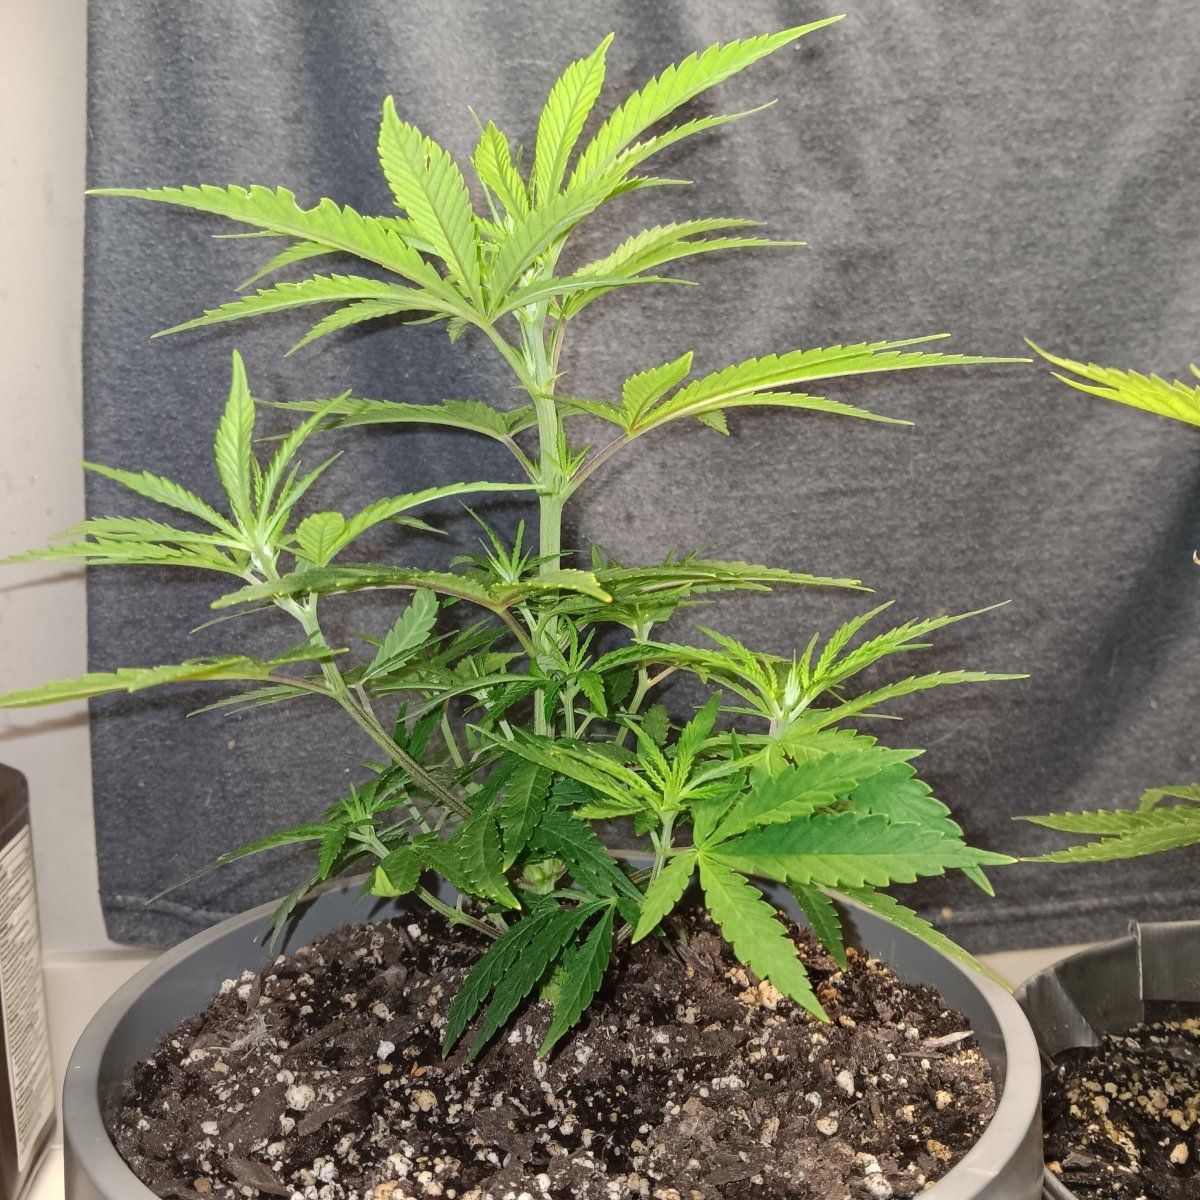 New growers question plants look too light in color on poor persons budget grow 5